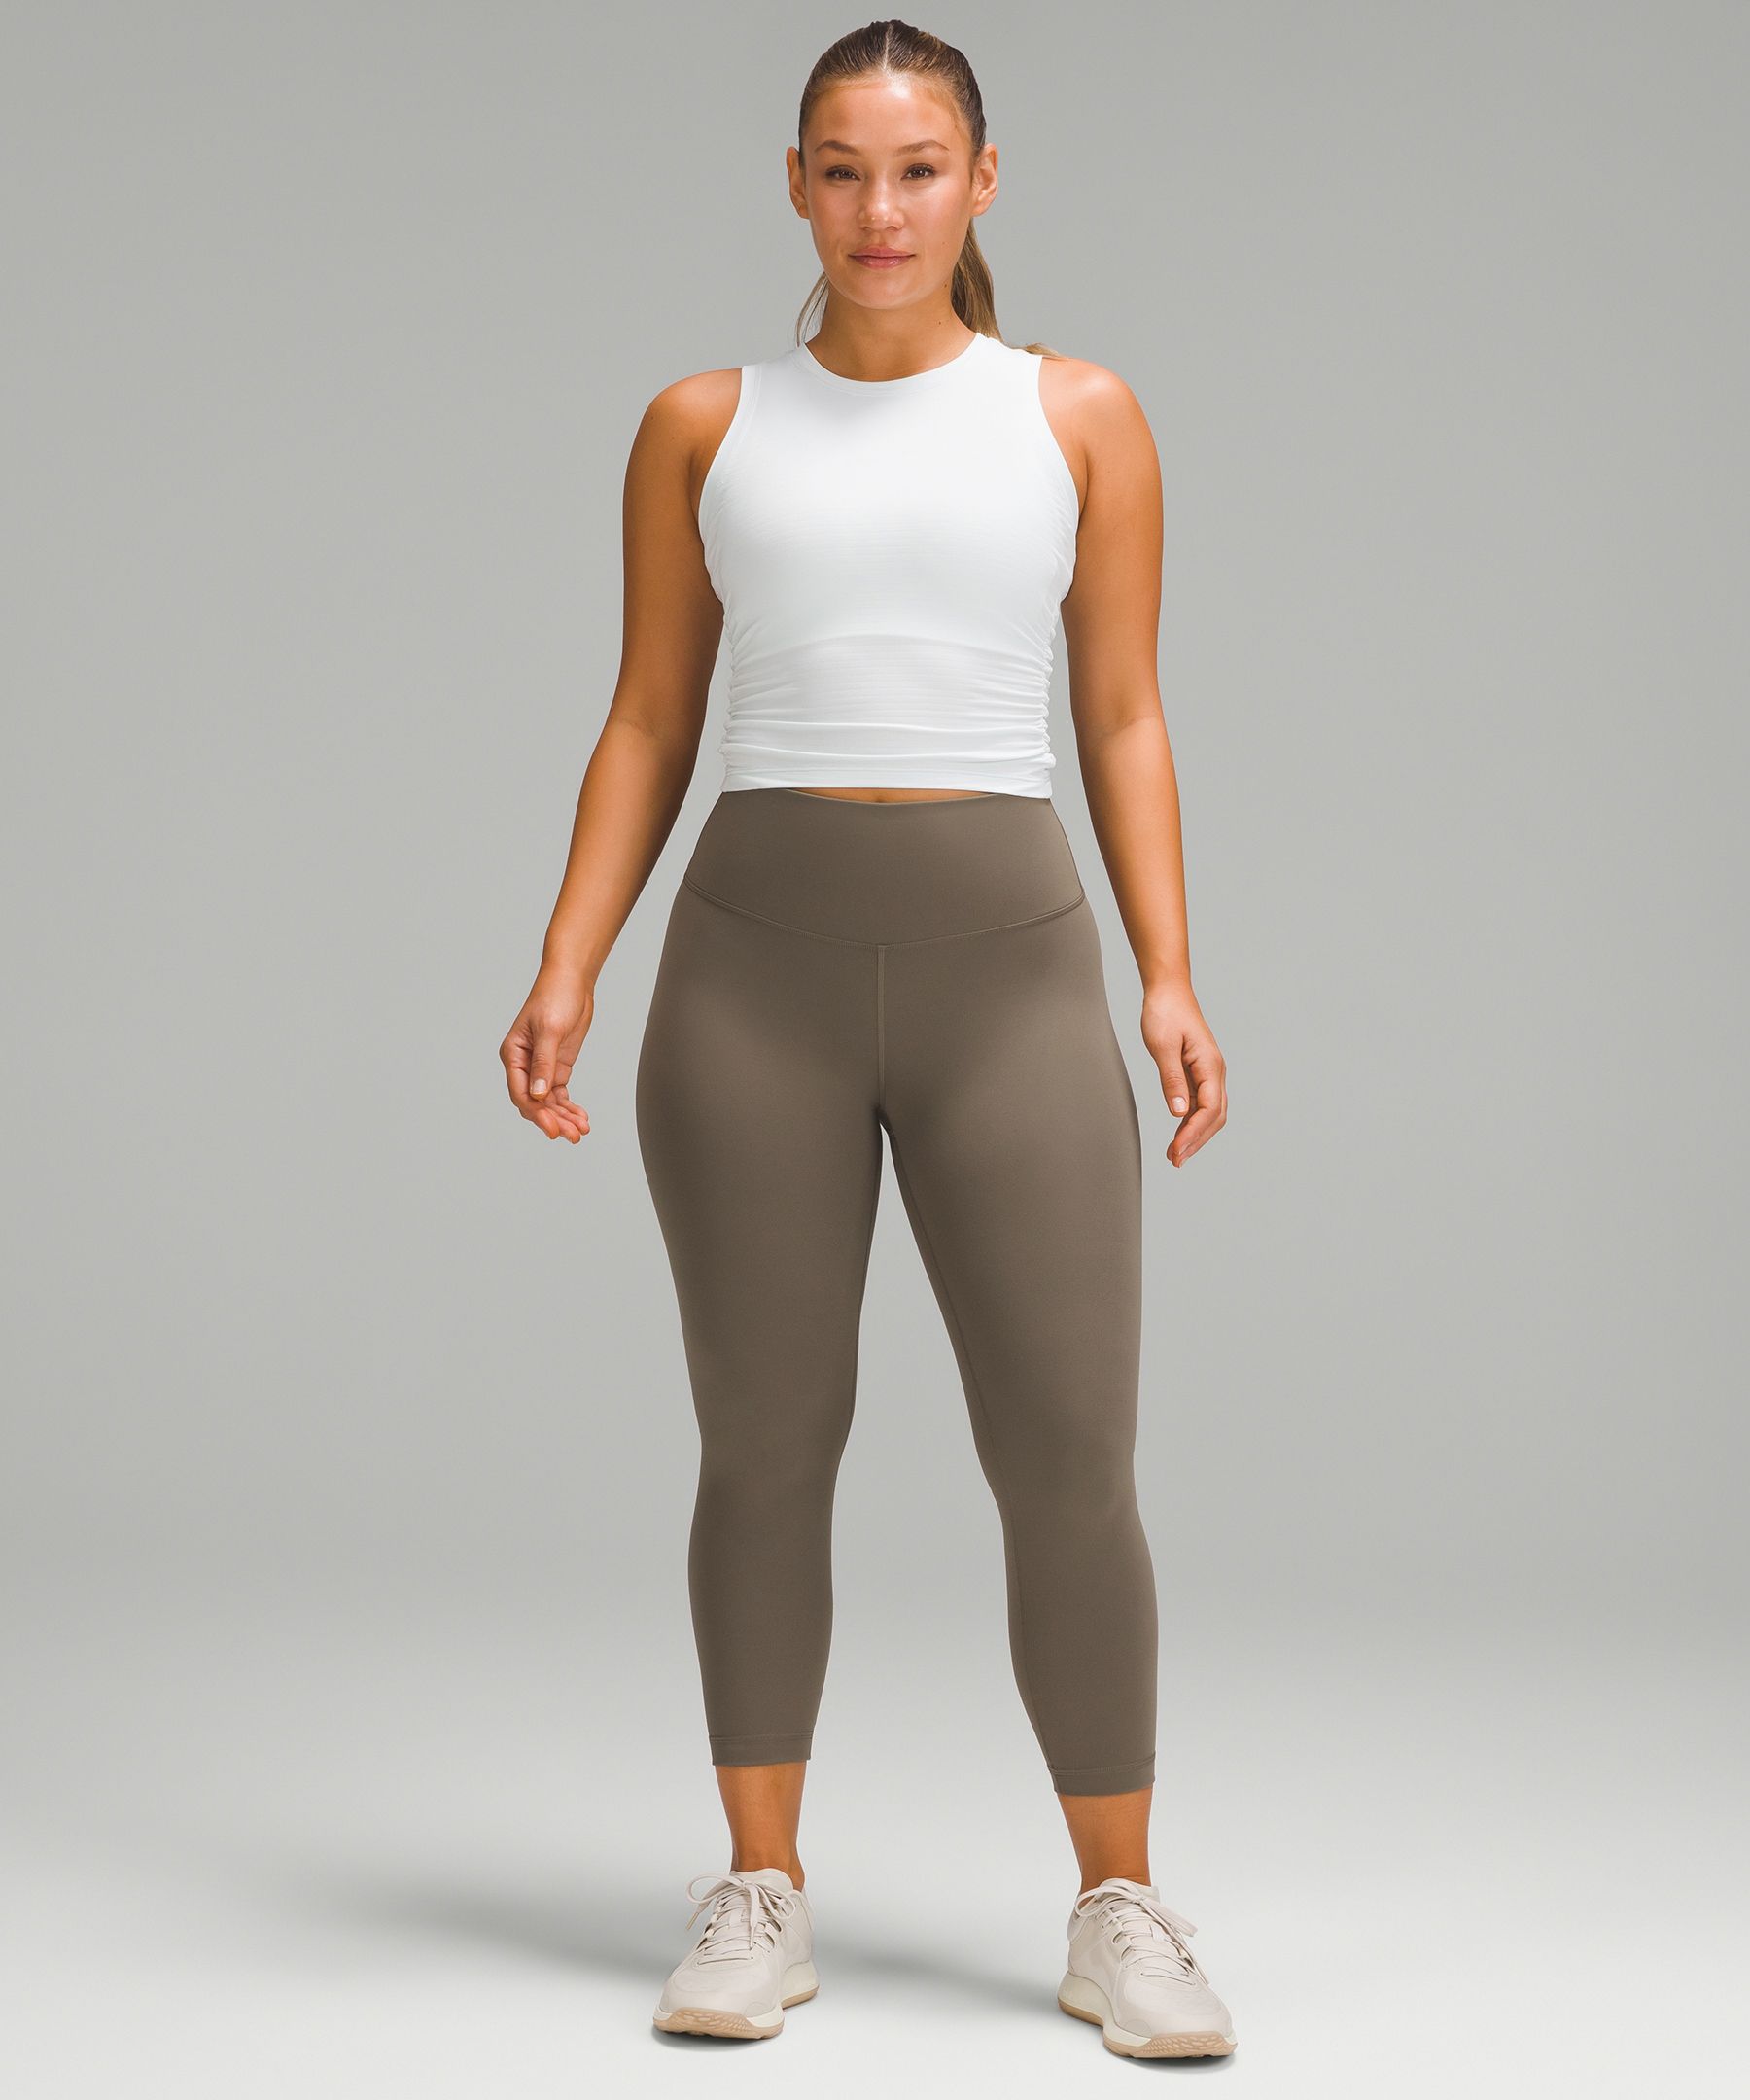 Wunder Train Contour Fit High-Rise … curated on LTK